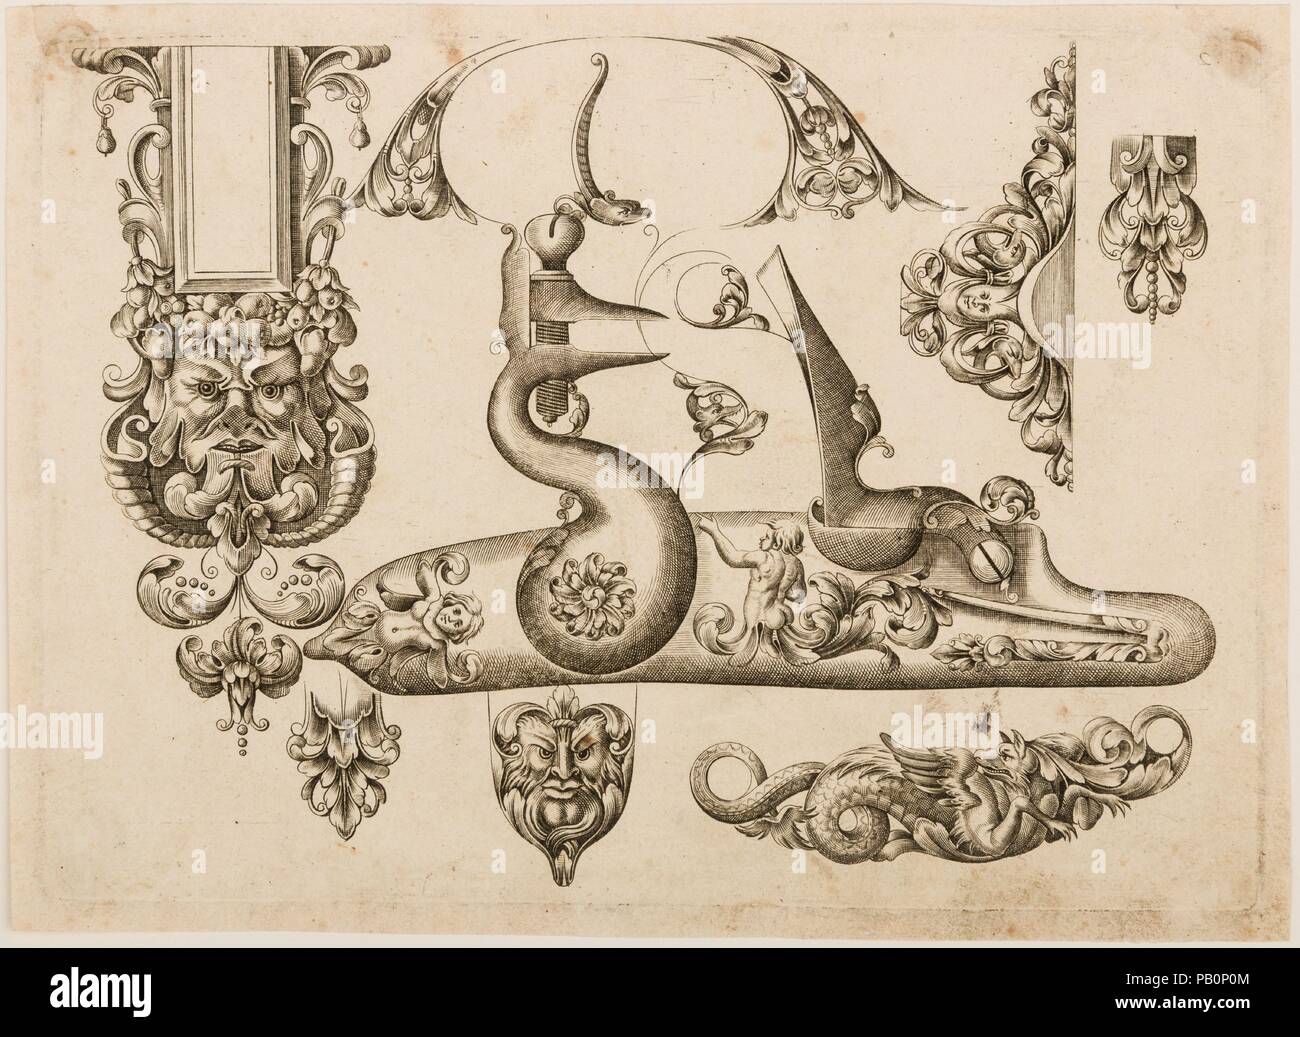 Plate Two from Plusieurs Models des plus nouuelles manieres qui sont en usage en l'Art de Arquebuzerie. Culture: French, Paris. Dimensions: sheet: 7 7/8 x 5 3/4 in. (20 x 14.6 cm); plate: 7 7/16 x 5 5/16 in. (18.9 x 13.5 cm). Engraver: C. Jacquinet (French, Paris, active mid-17th century). Publisher: Thuraine (French, Paris, active mid-17th century); Le Hollandois (French, Paris, active mid-17th century). Date: ca. 1660.  Little is known about the royal gunmakers, Thuraine and Le Hollandois, who published the pattern book from which this sheet comes. It remains a rare and important document of Stock Photo